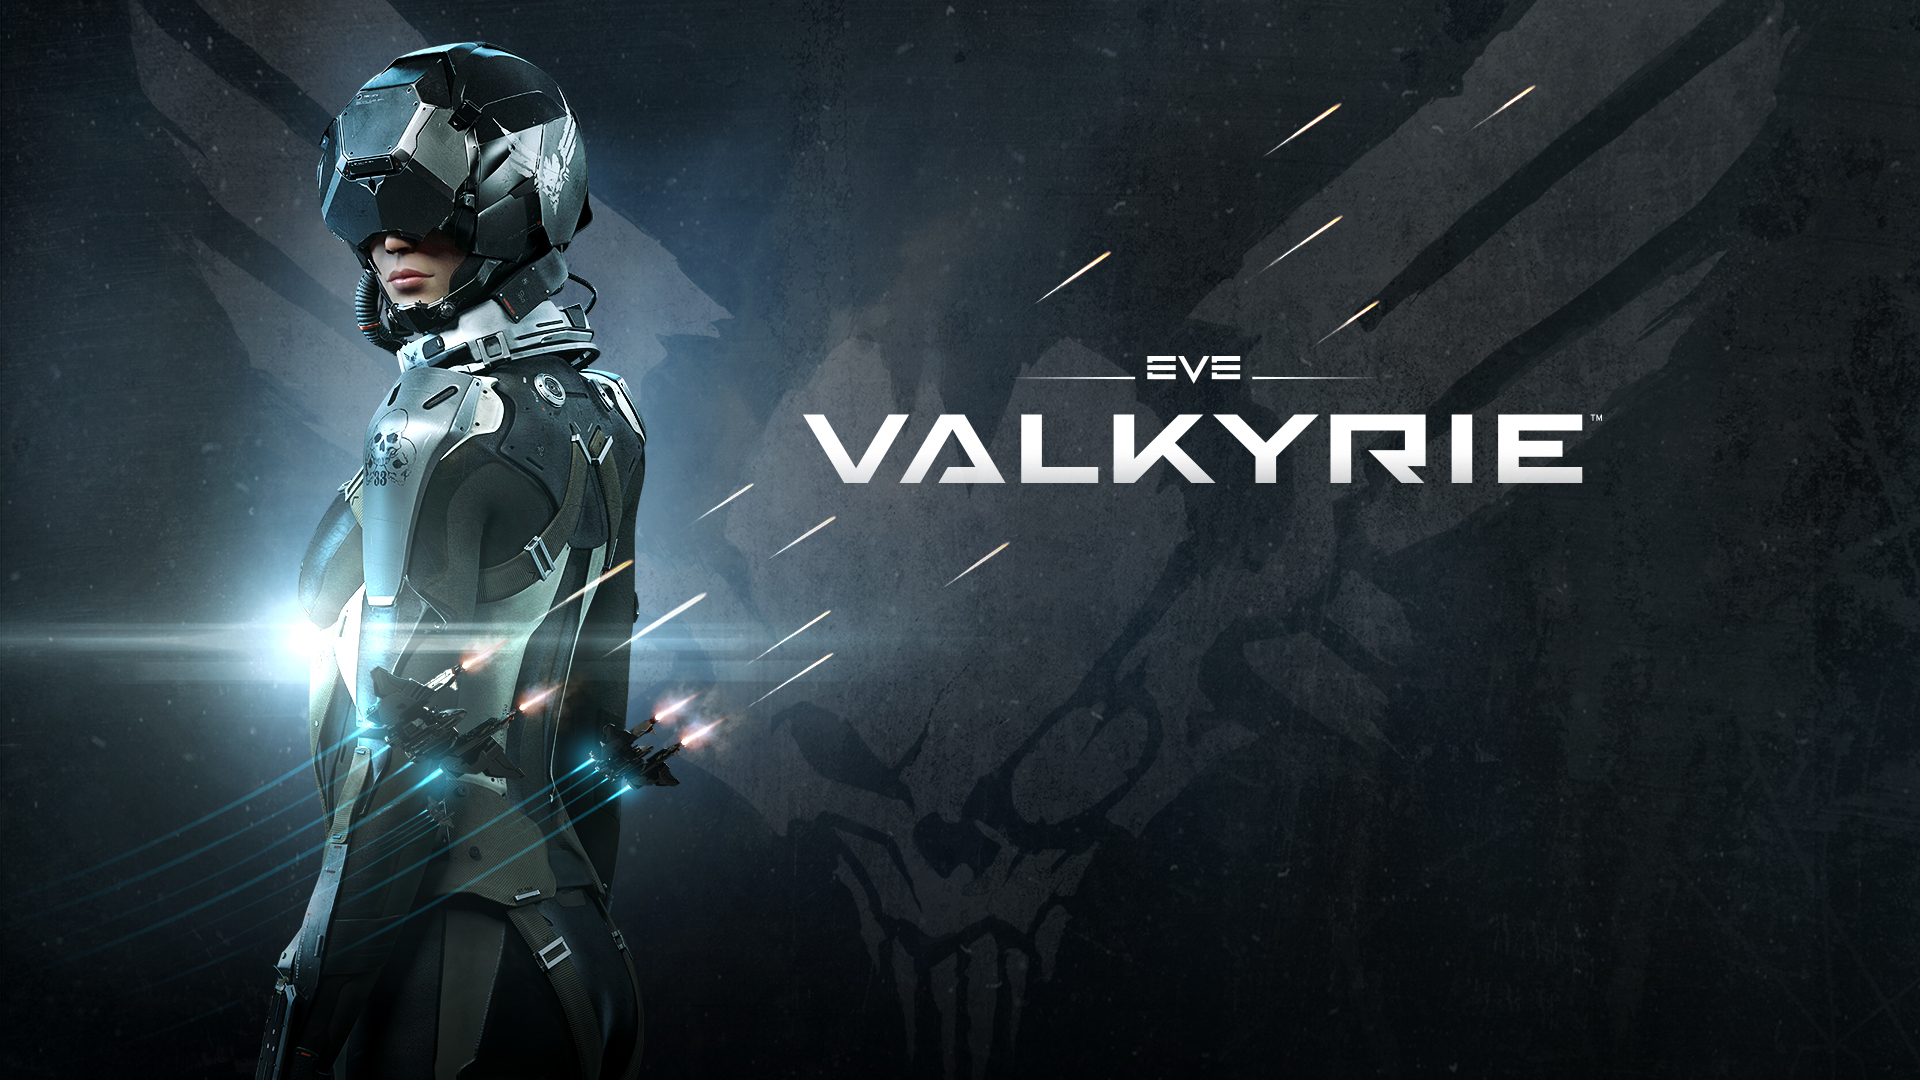 Eve: Valkyrie is a multiplayer dogfighting shooter game set in the Eve Online universe that is designed to use virtual reality headset technology.